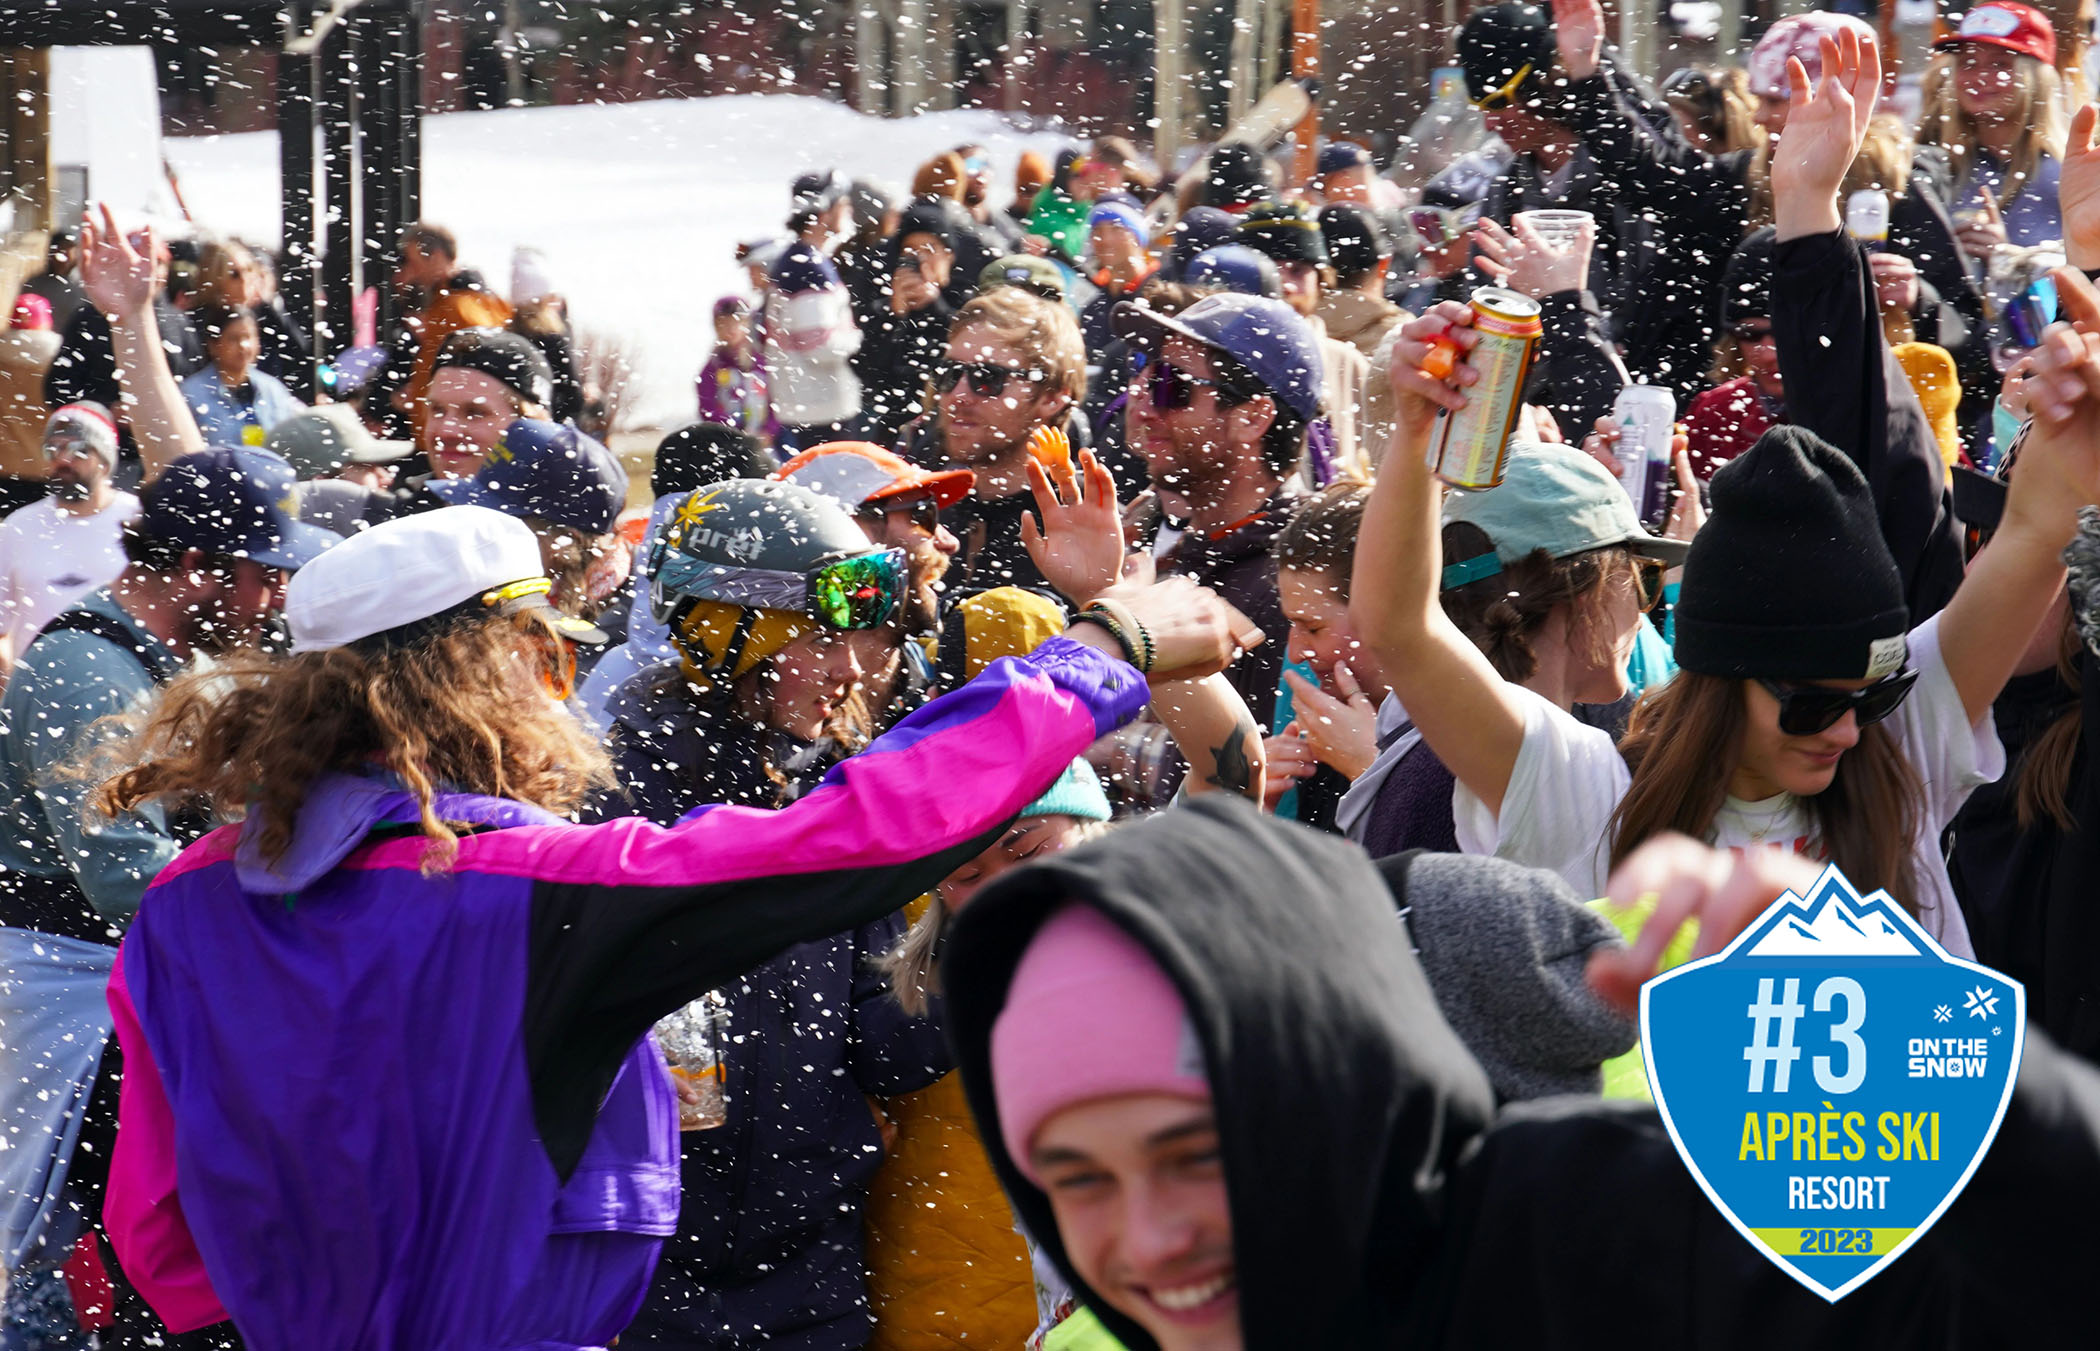 People partying at the base of the mountain with Apres Ski badge